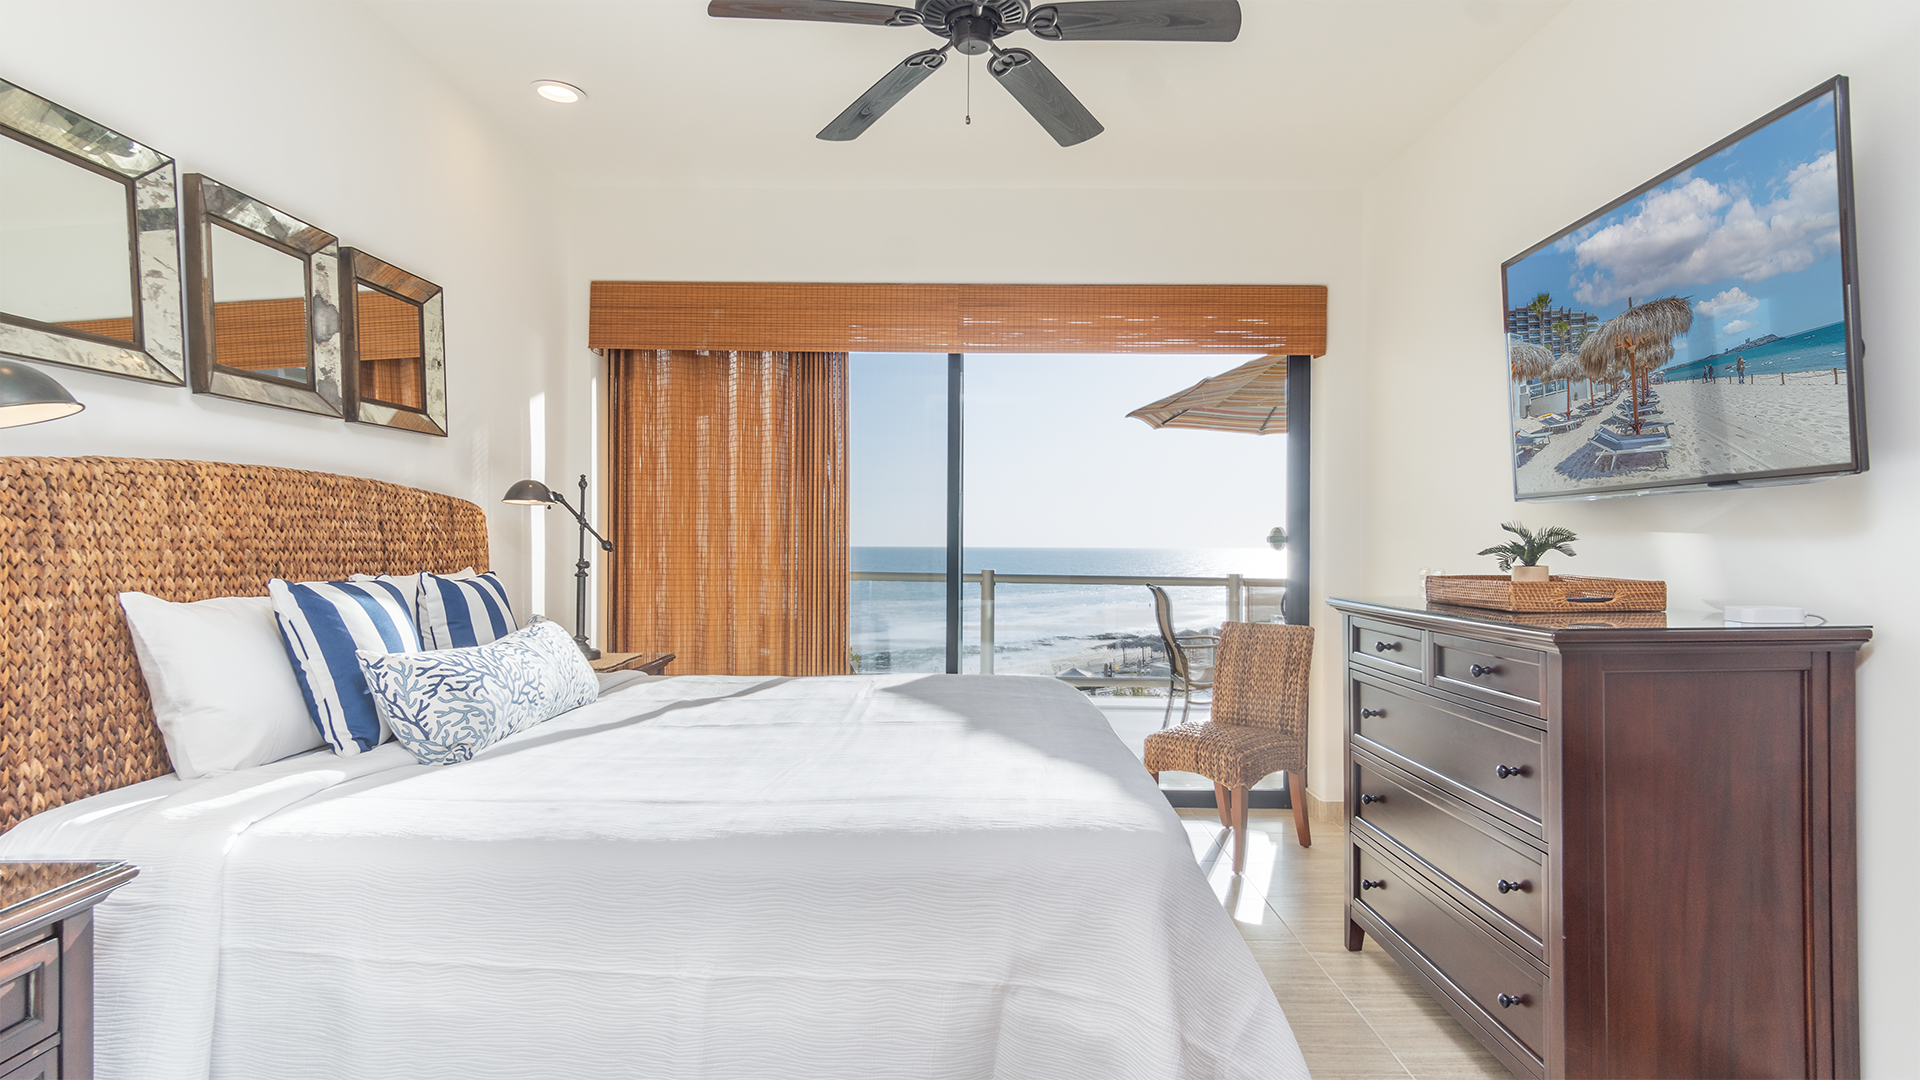 Seaside bedroom with TV and balcony access